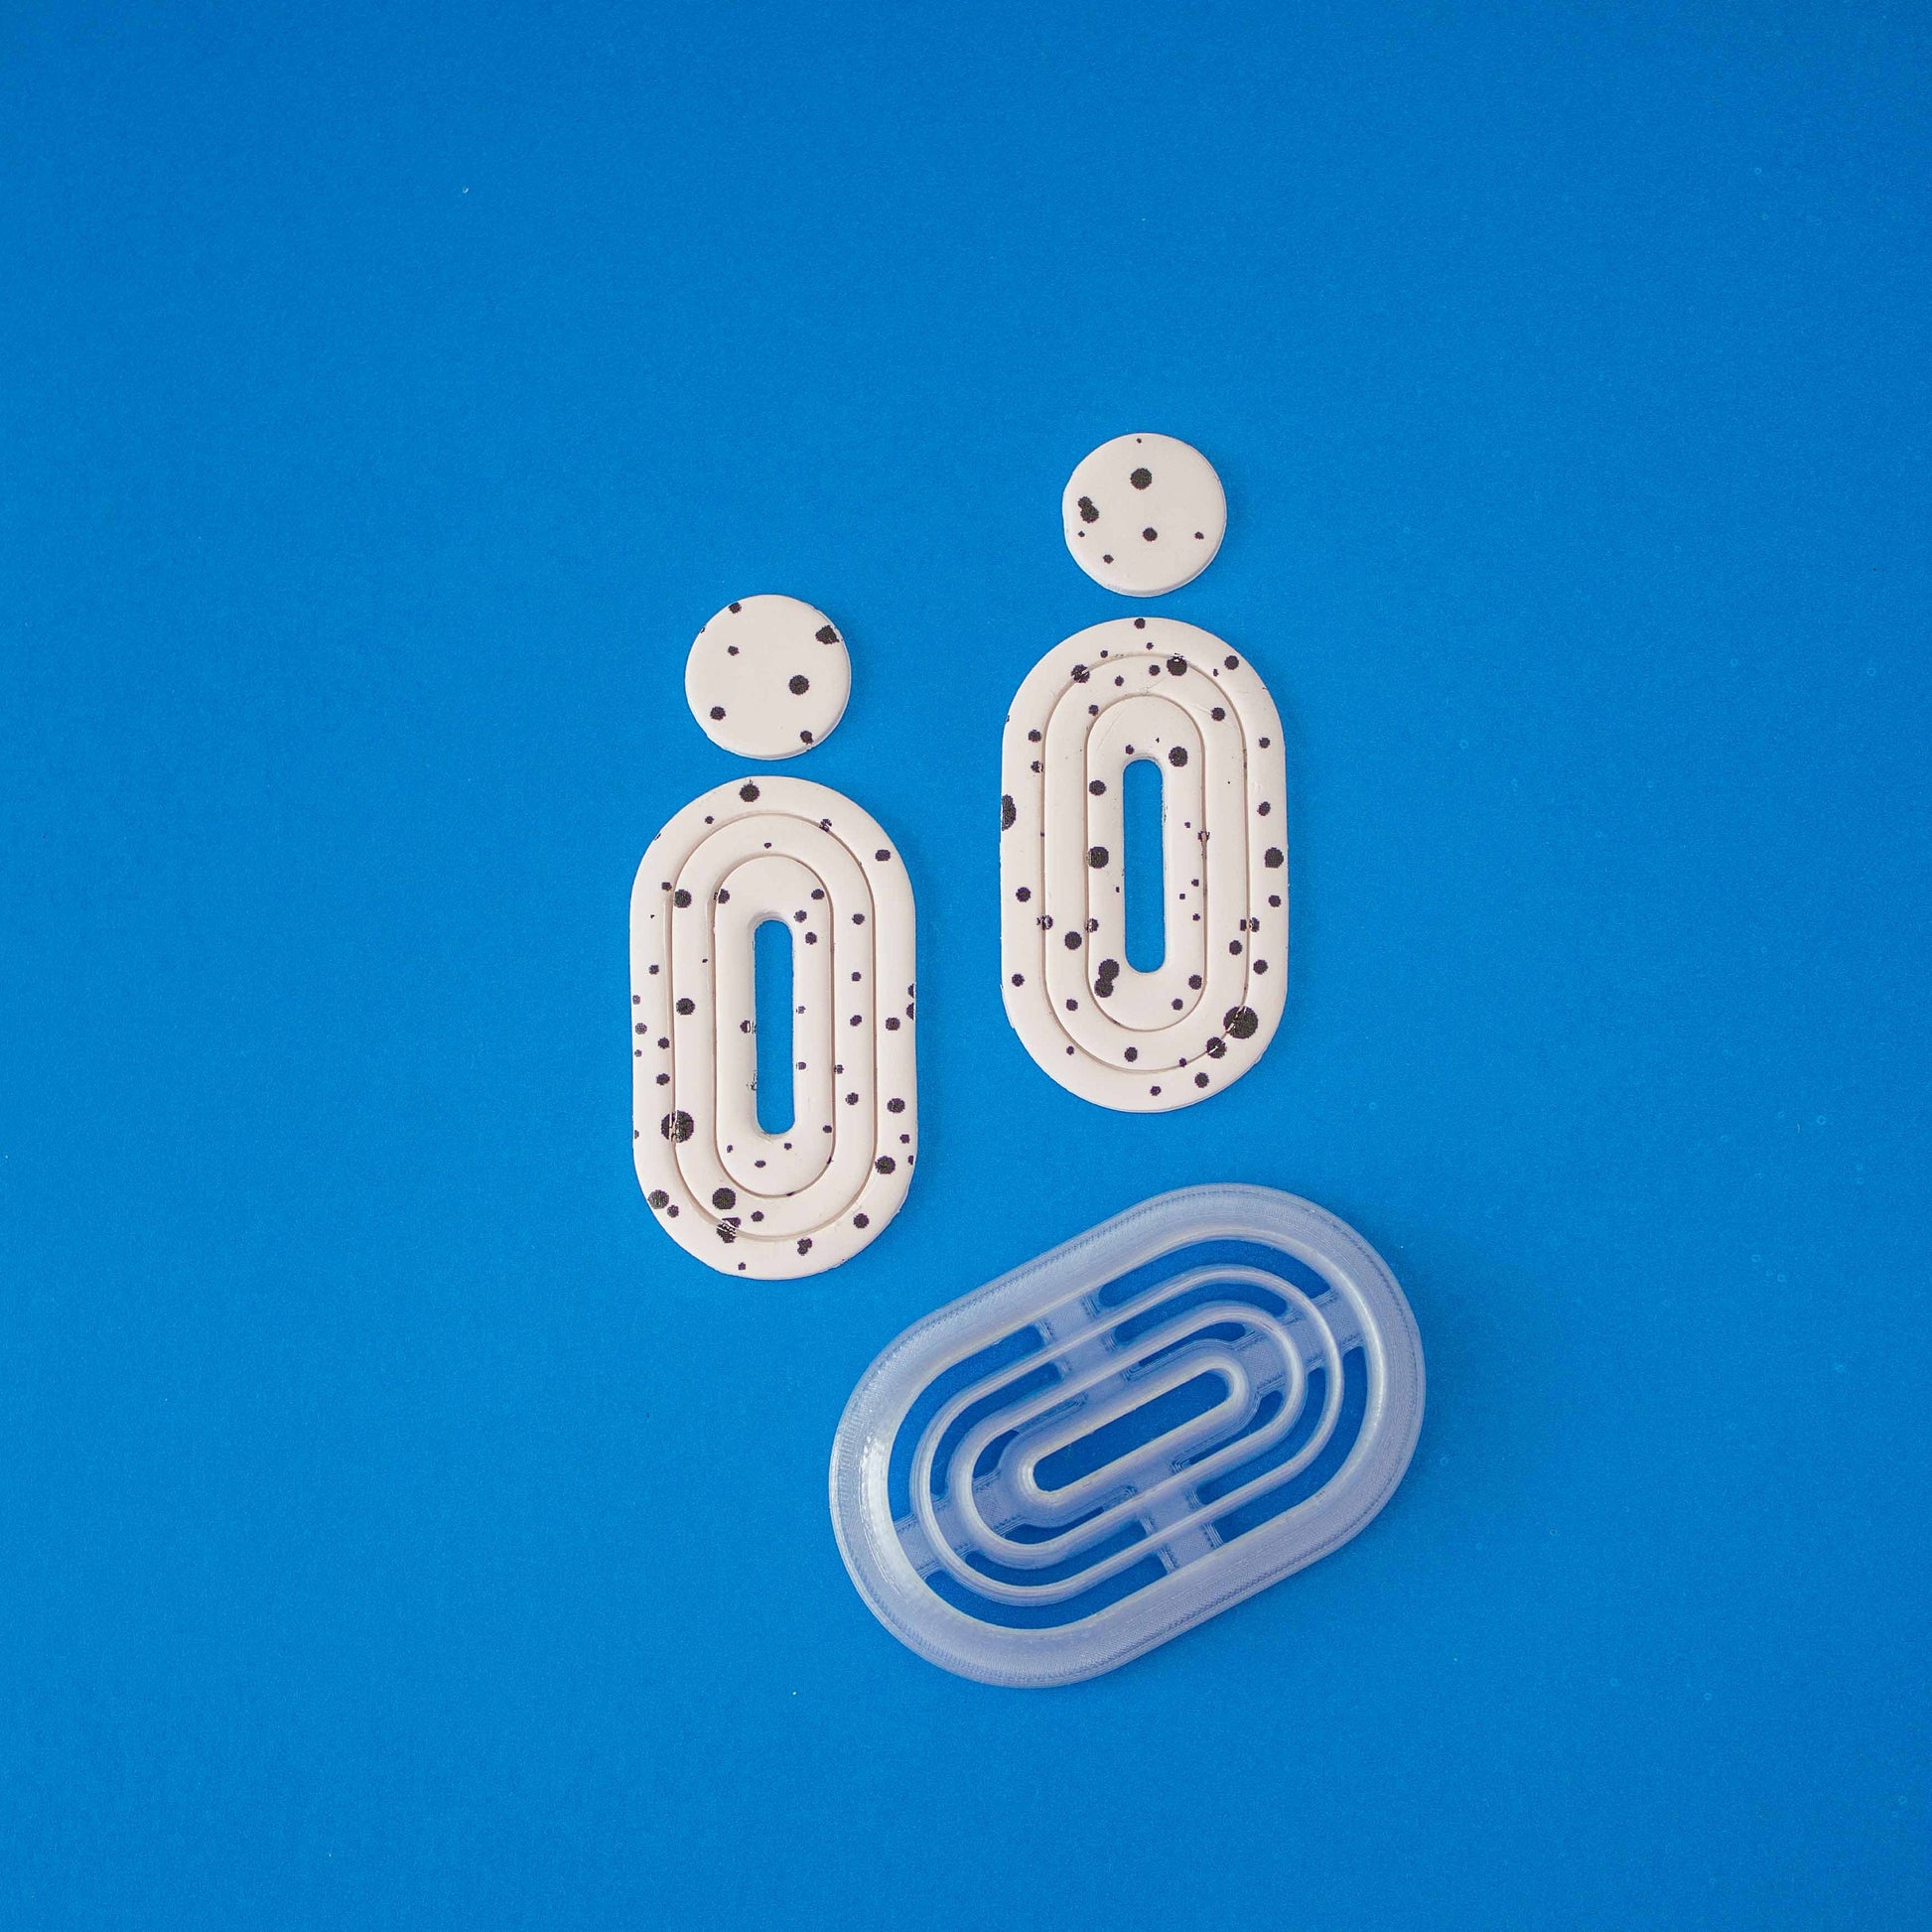 Donut cutter and 2 donut polymer clay earrings on a blue background.